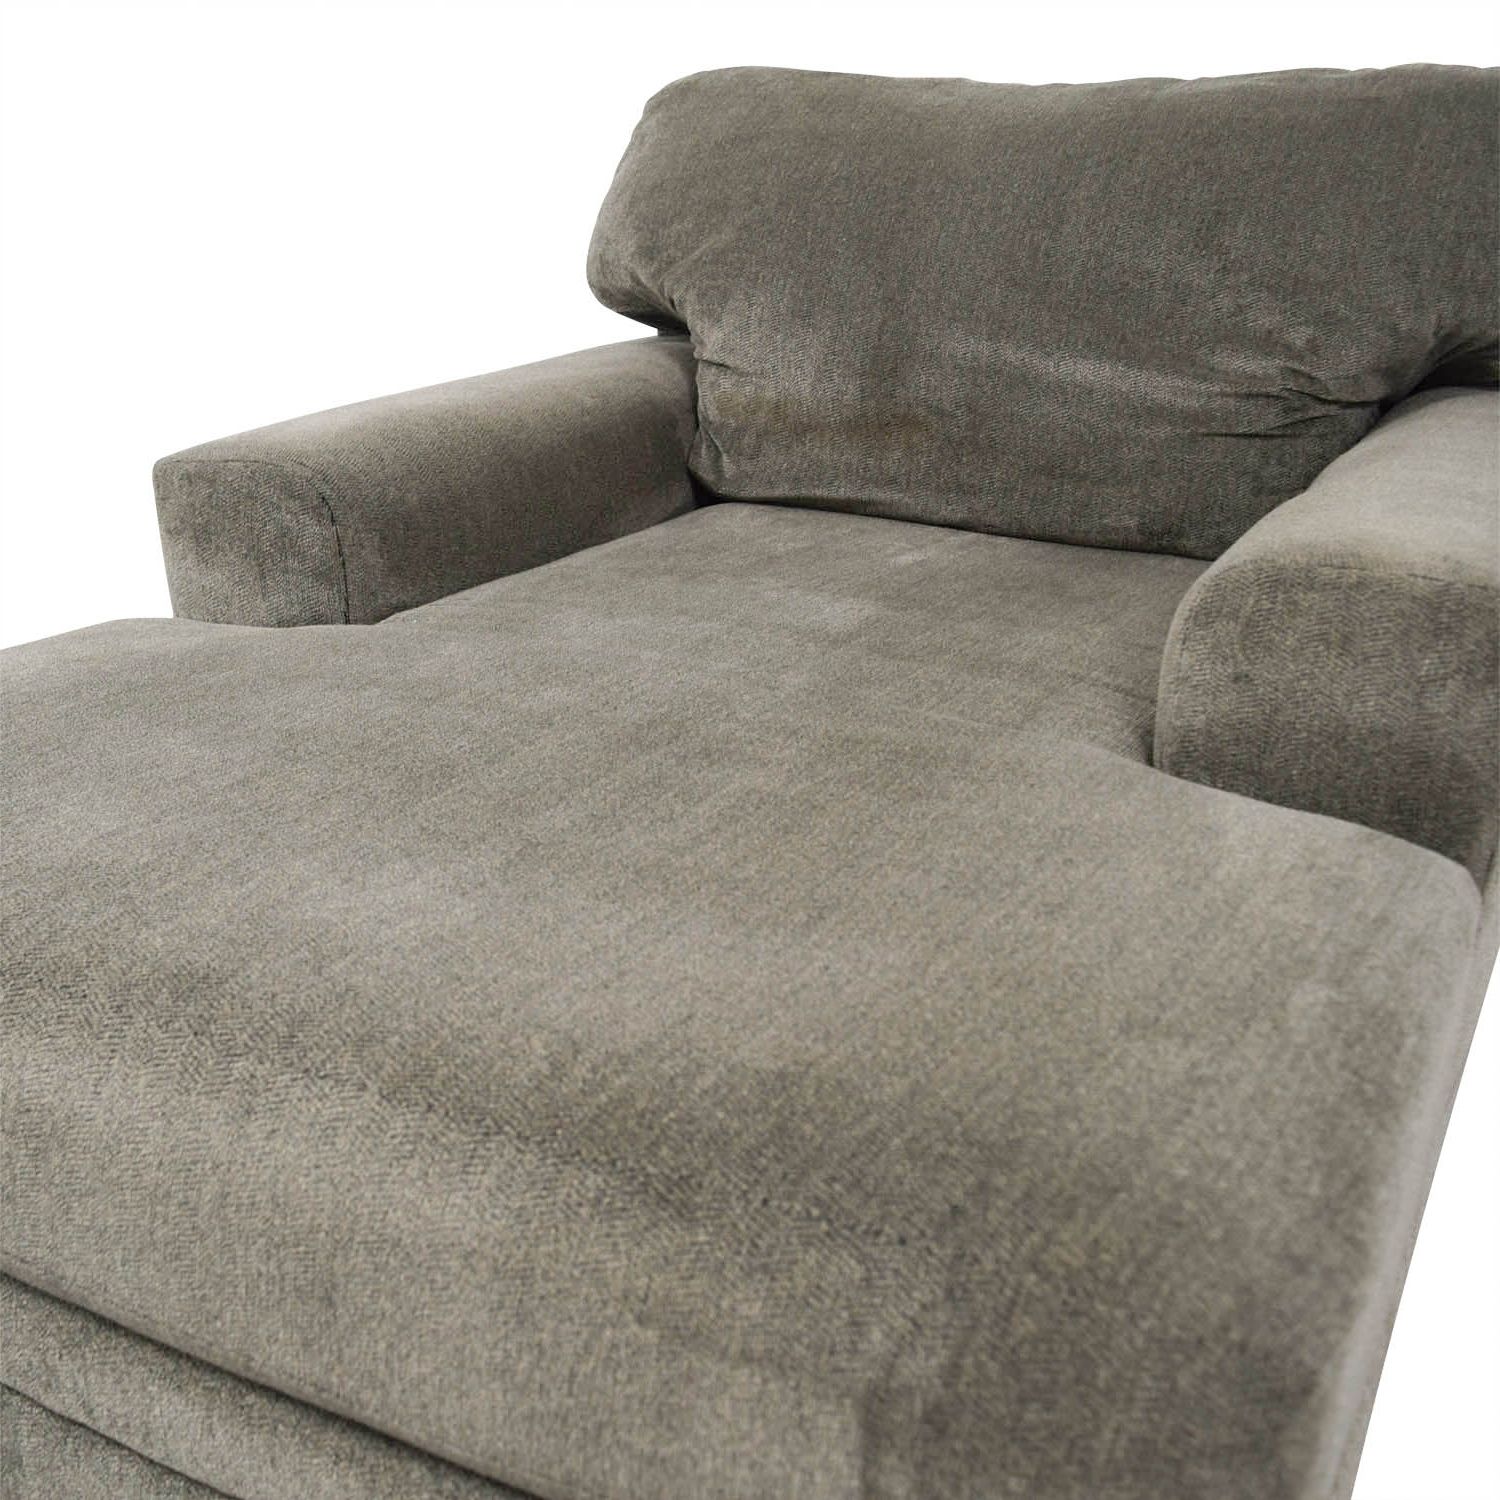 [%81% Off – Bob's Furniture Bob's Furniture Grey Chaise Lounge / Sofas Intended For Widely Used Grey Chaises|grey Chaises For Latest 81% Off – Bob's Furniture Bob's Furniture Grey Chaise Lounge / Sofas|well Known Grey Chaises For 81% Off – Bob's Furniture Bob's Furniture Grey Chaise Lounge / Sofas|famous 81% Off – Bob's Furniture Bob's Furniture Grey Chaise Lounge / Sofas Regarding Grey Chaises%] (Photo 13 of 15)